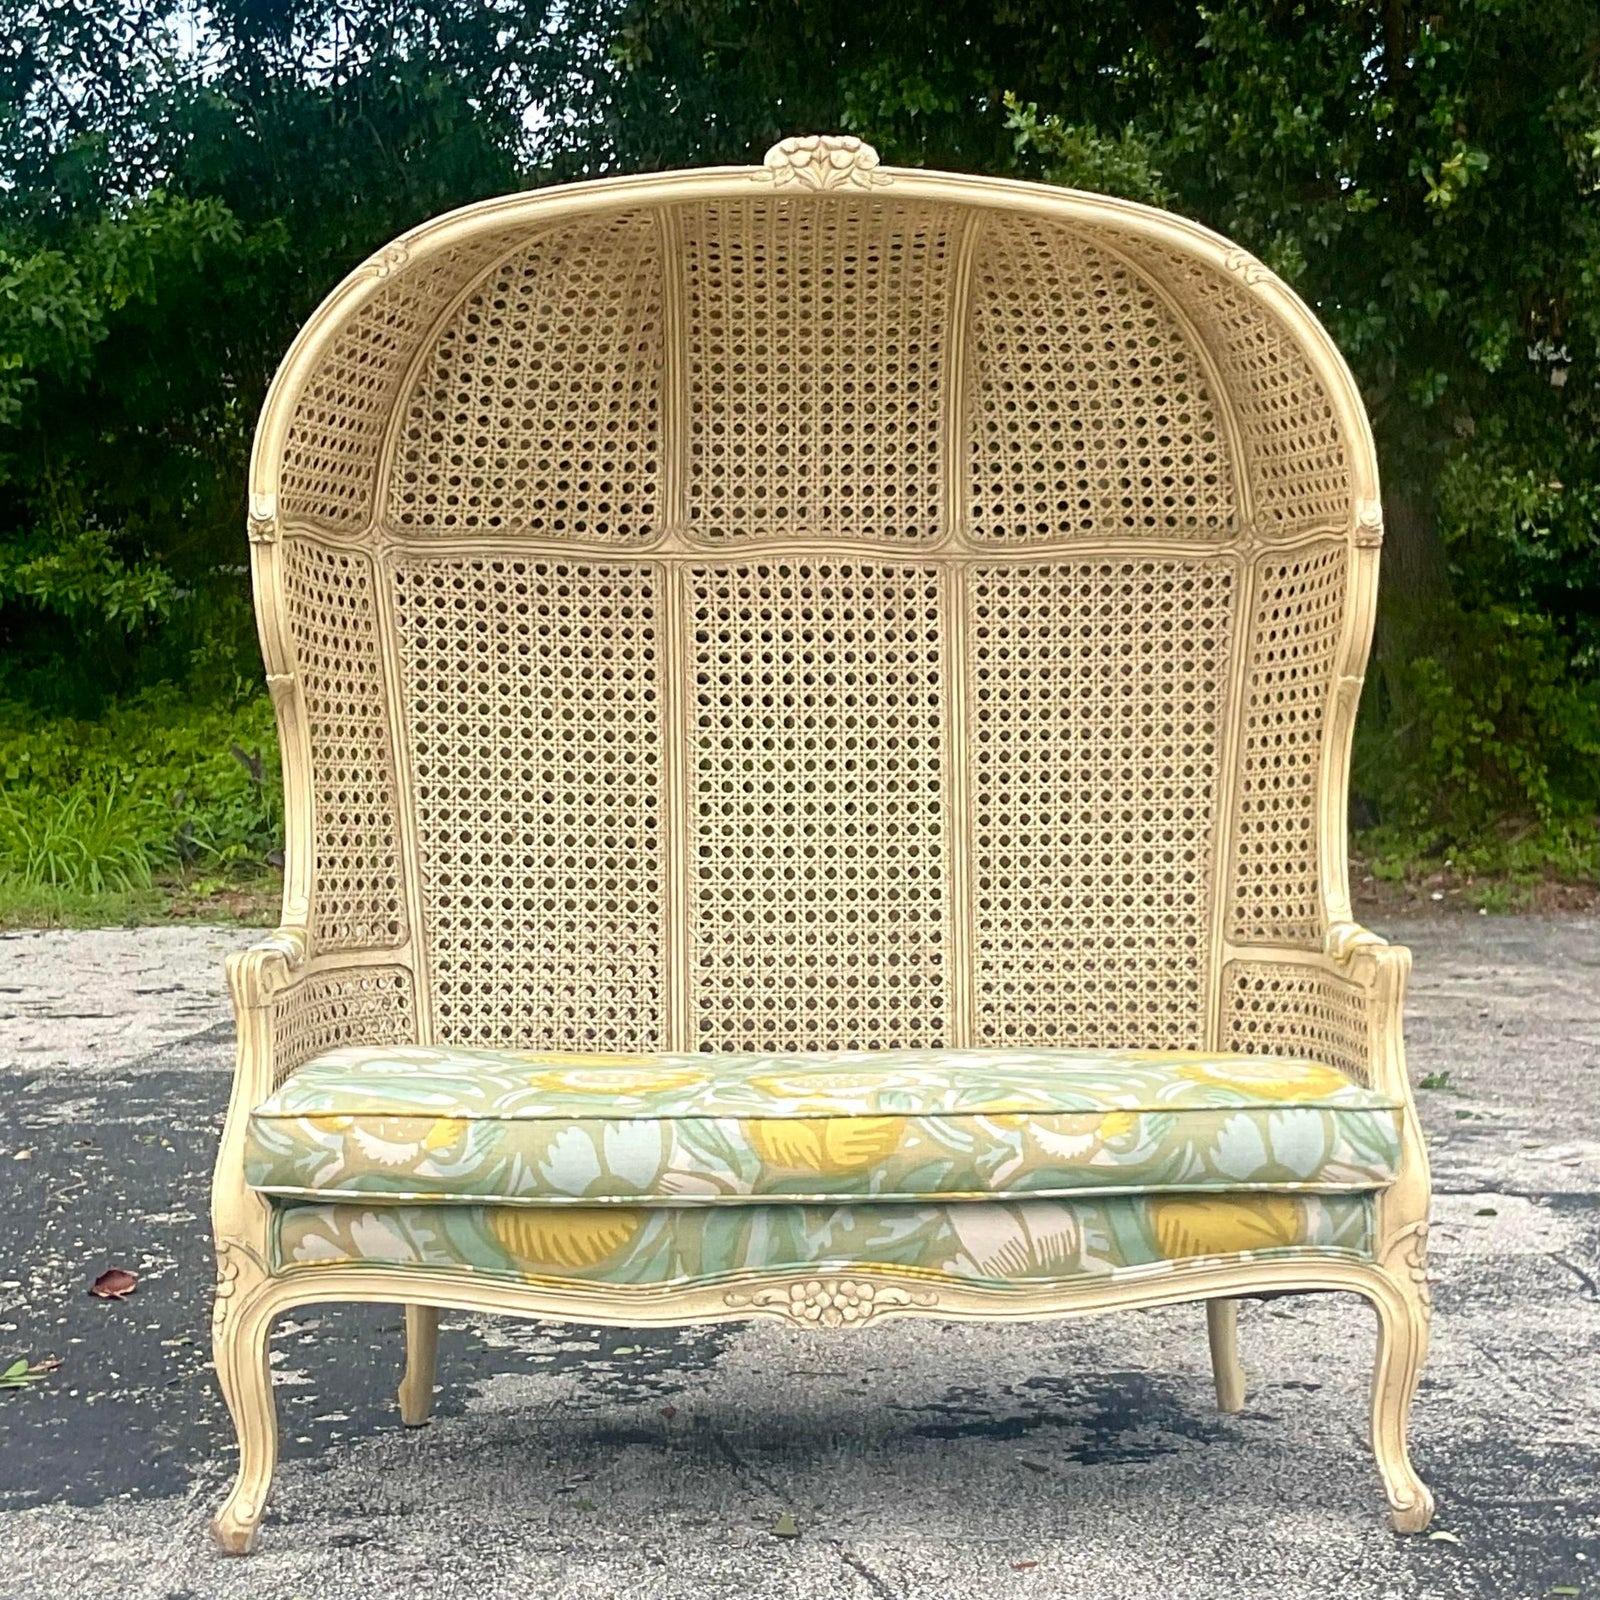 A stunning vintage Boho loveseat. The iconic balloon back shape with inset cane panels. Newly upholstered in a chic floral printed linen cotton blend. The 2 throw pillows are included. Acquired from a Palm Beach estate